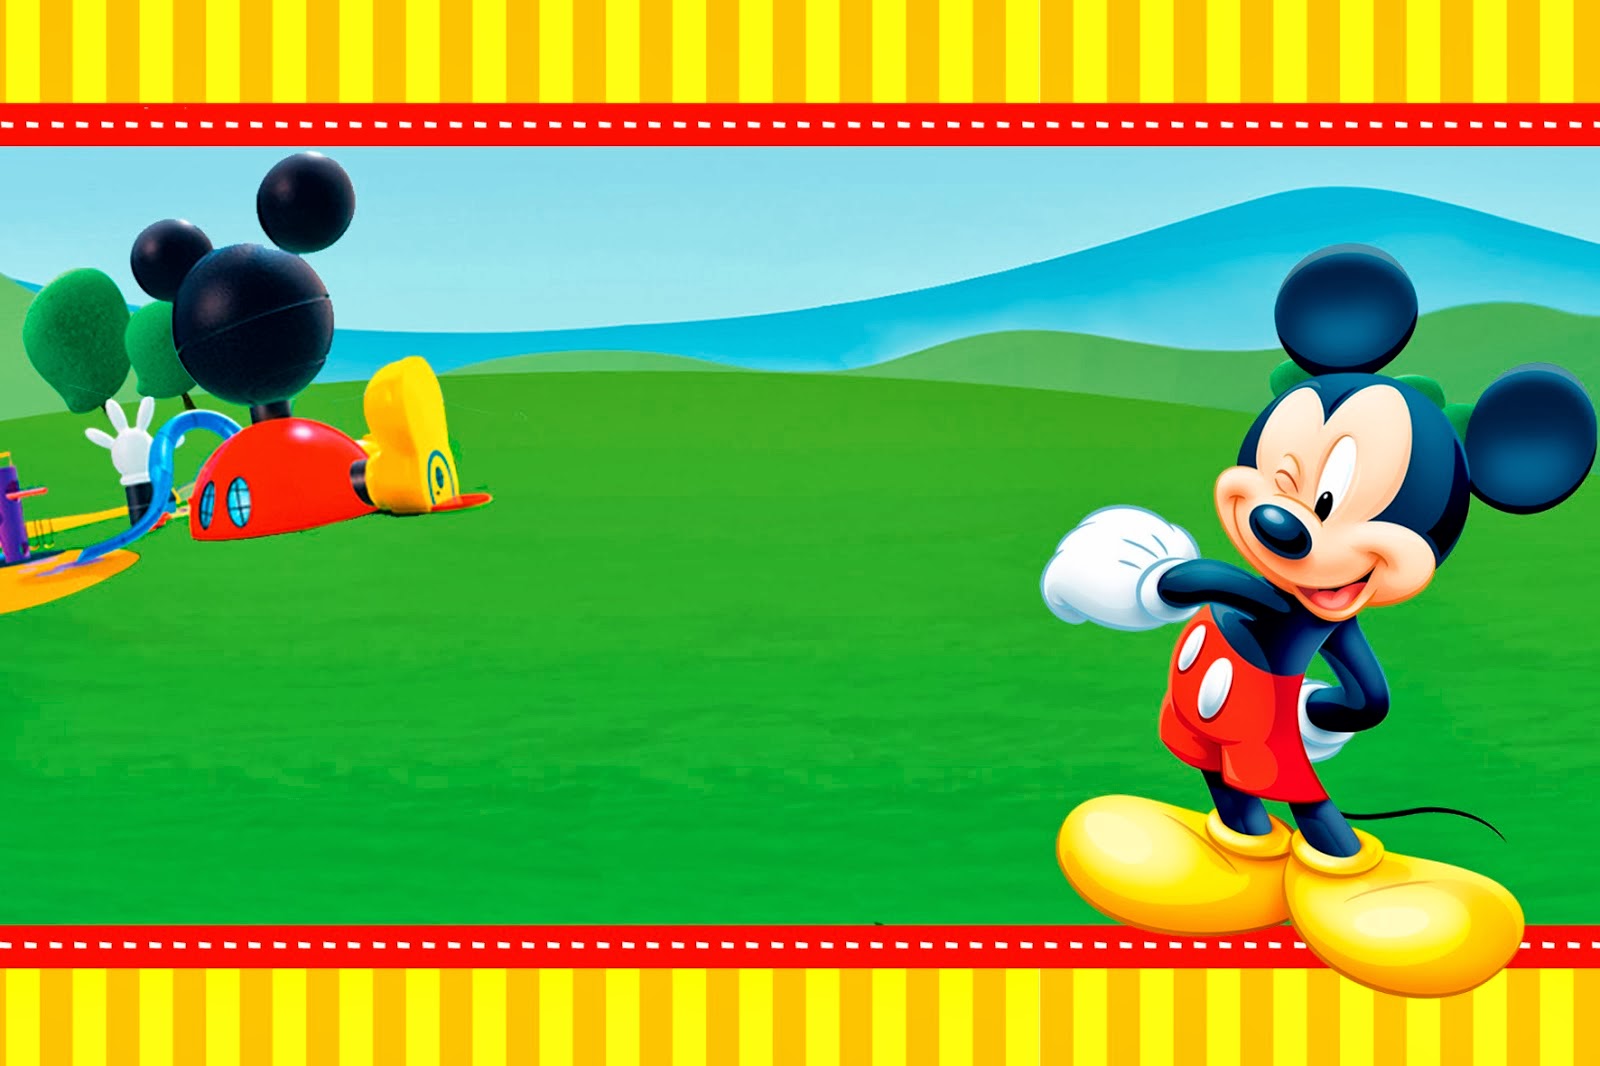 Mickey Clubhouse: Invitations and Party Free Printables. | Oh My ...